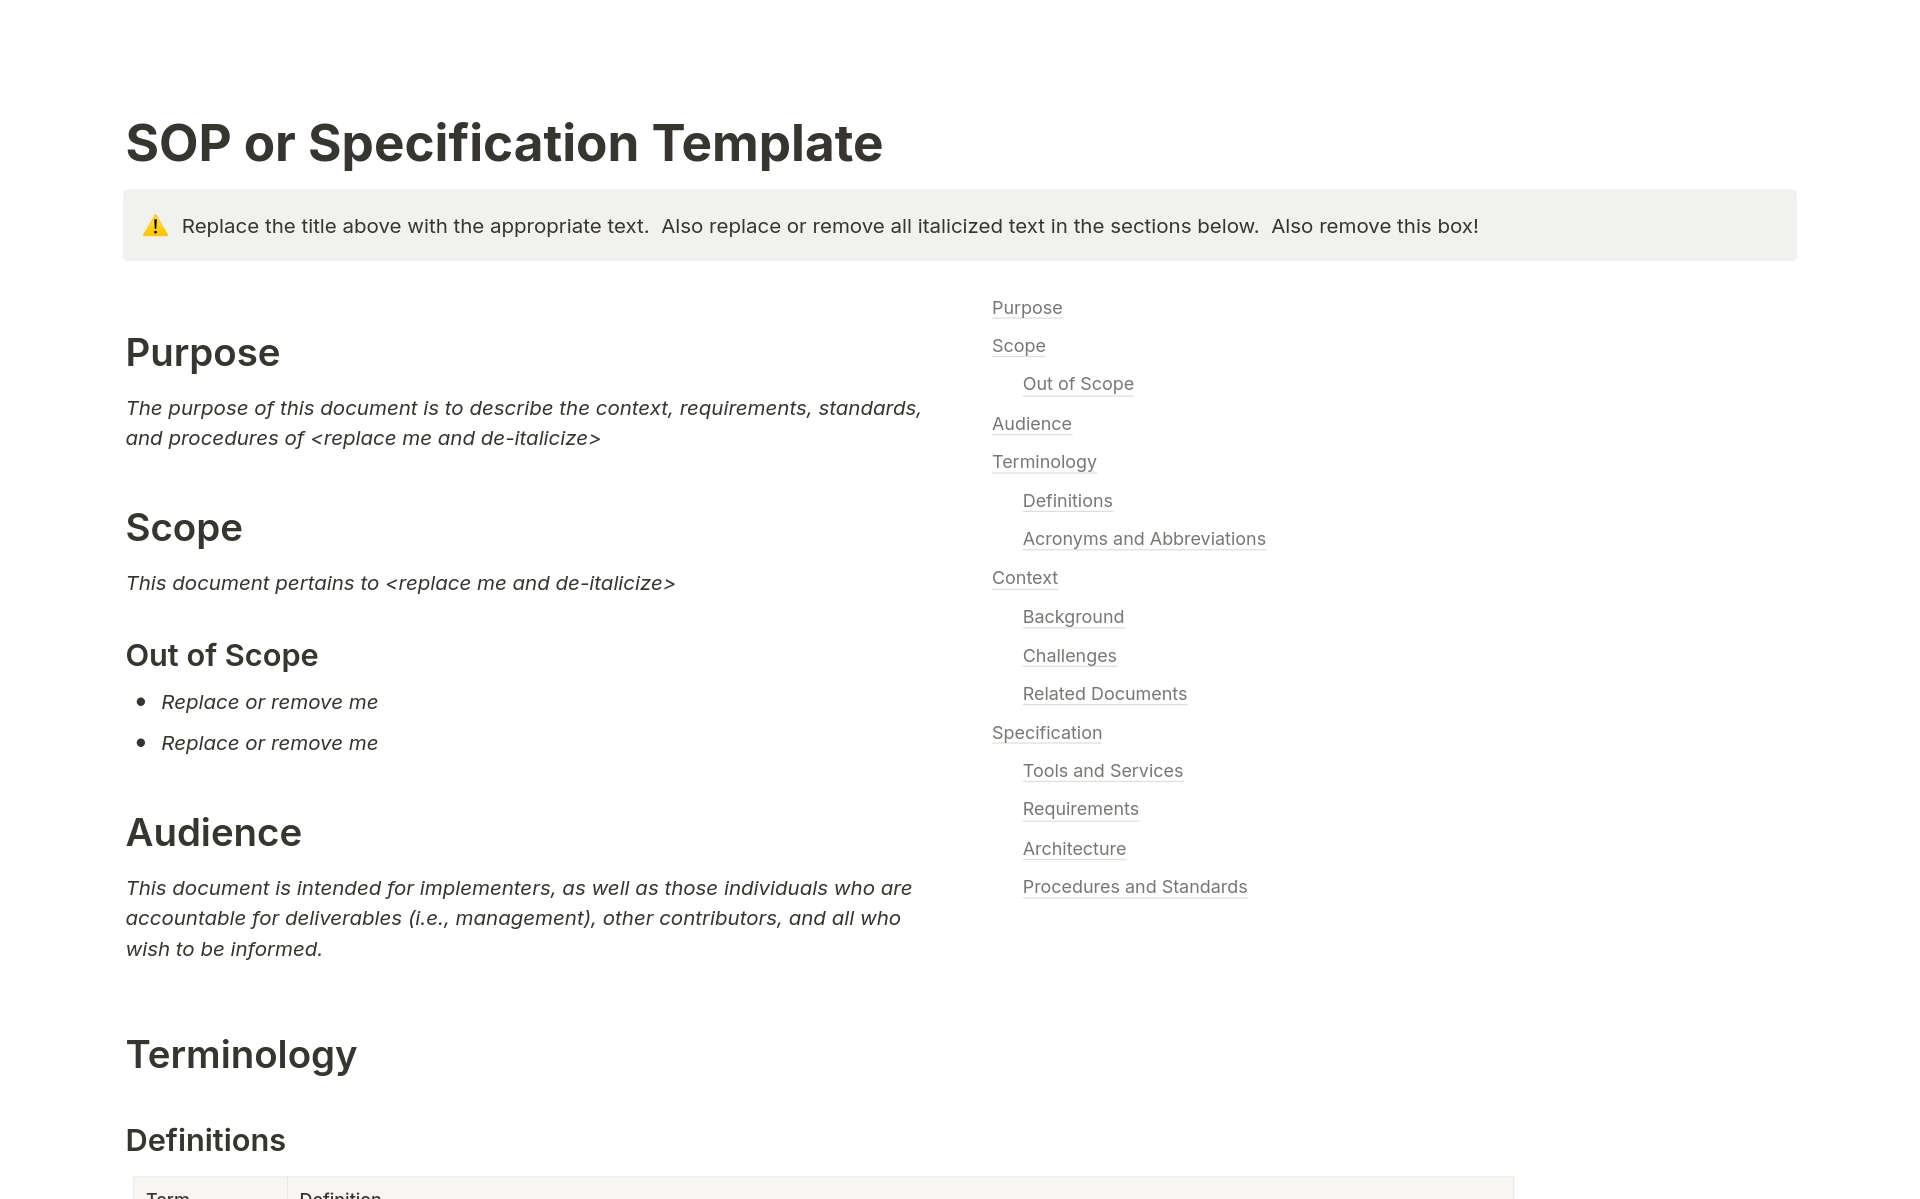 A template preview for SOP or Specification